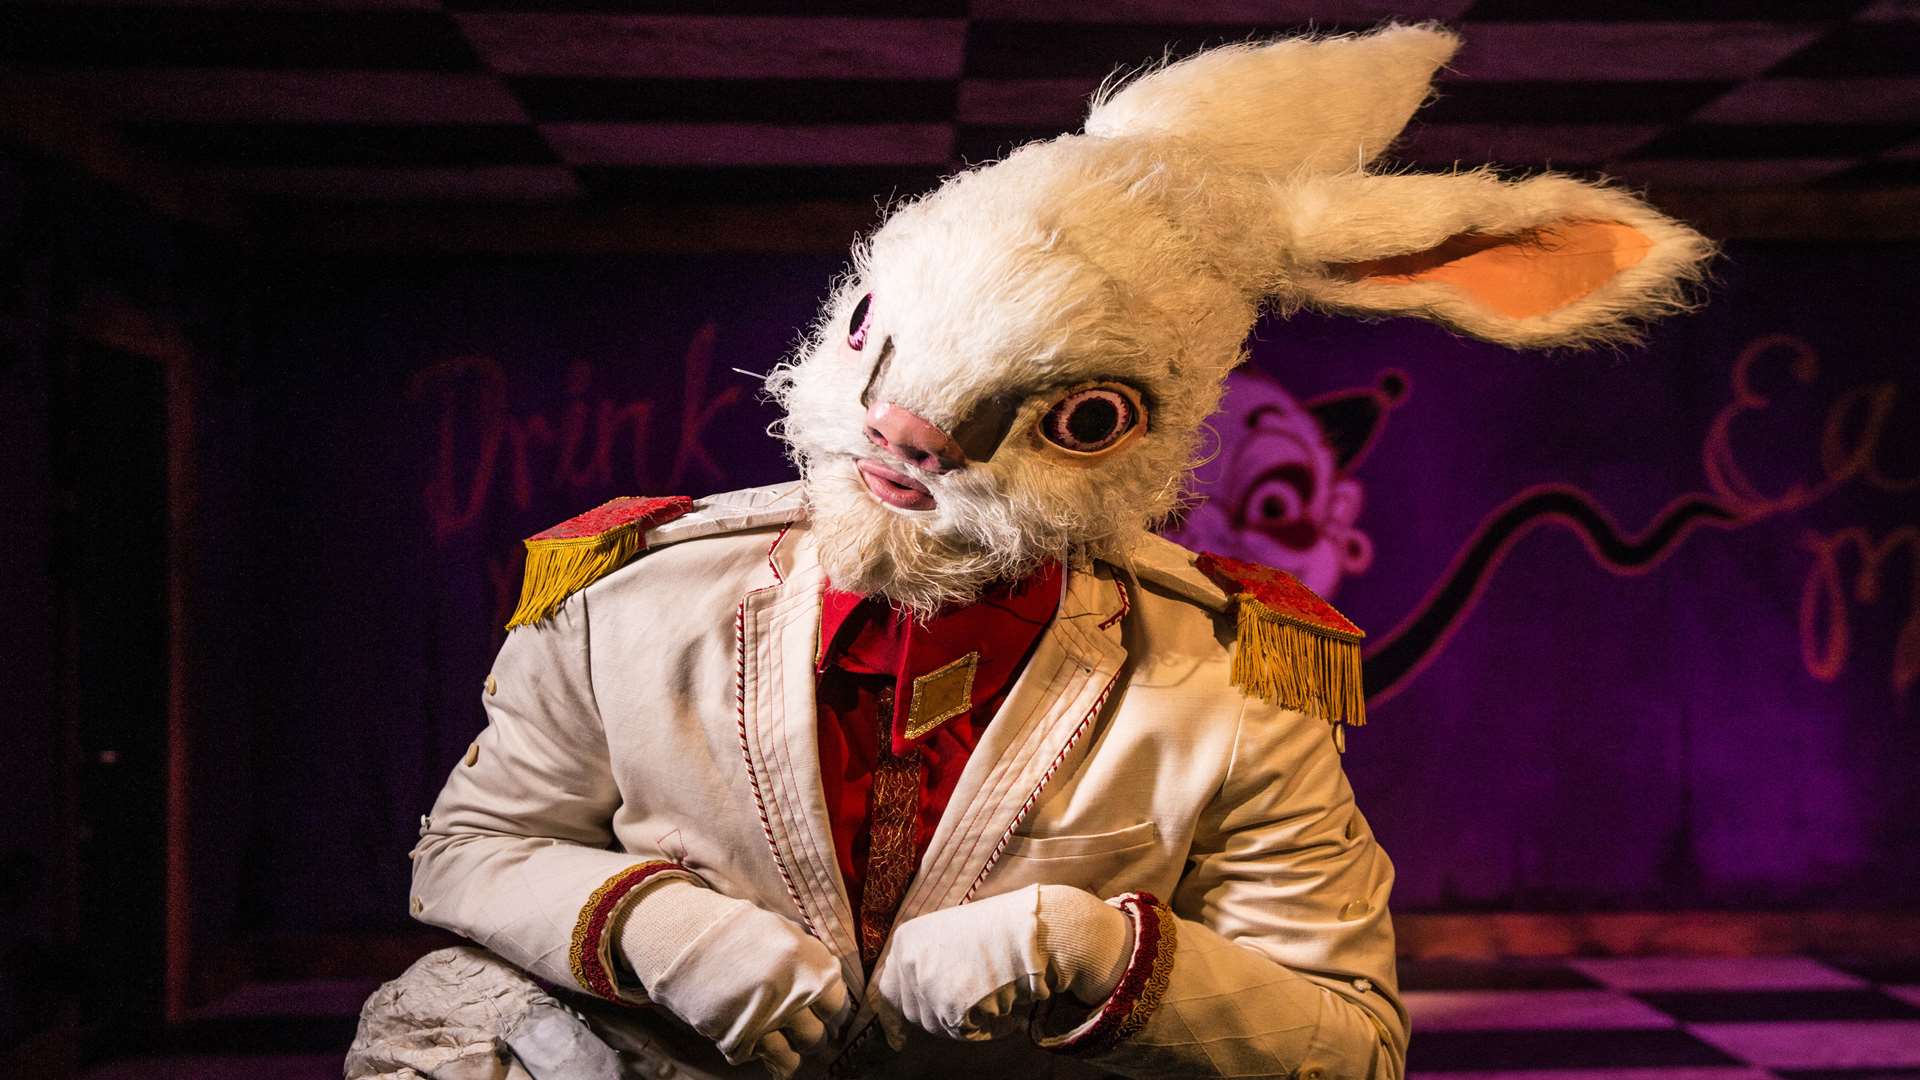 The White Rabbit in Alice's Adventures Underground at The Vaults under Waterloo Station